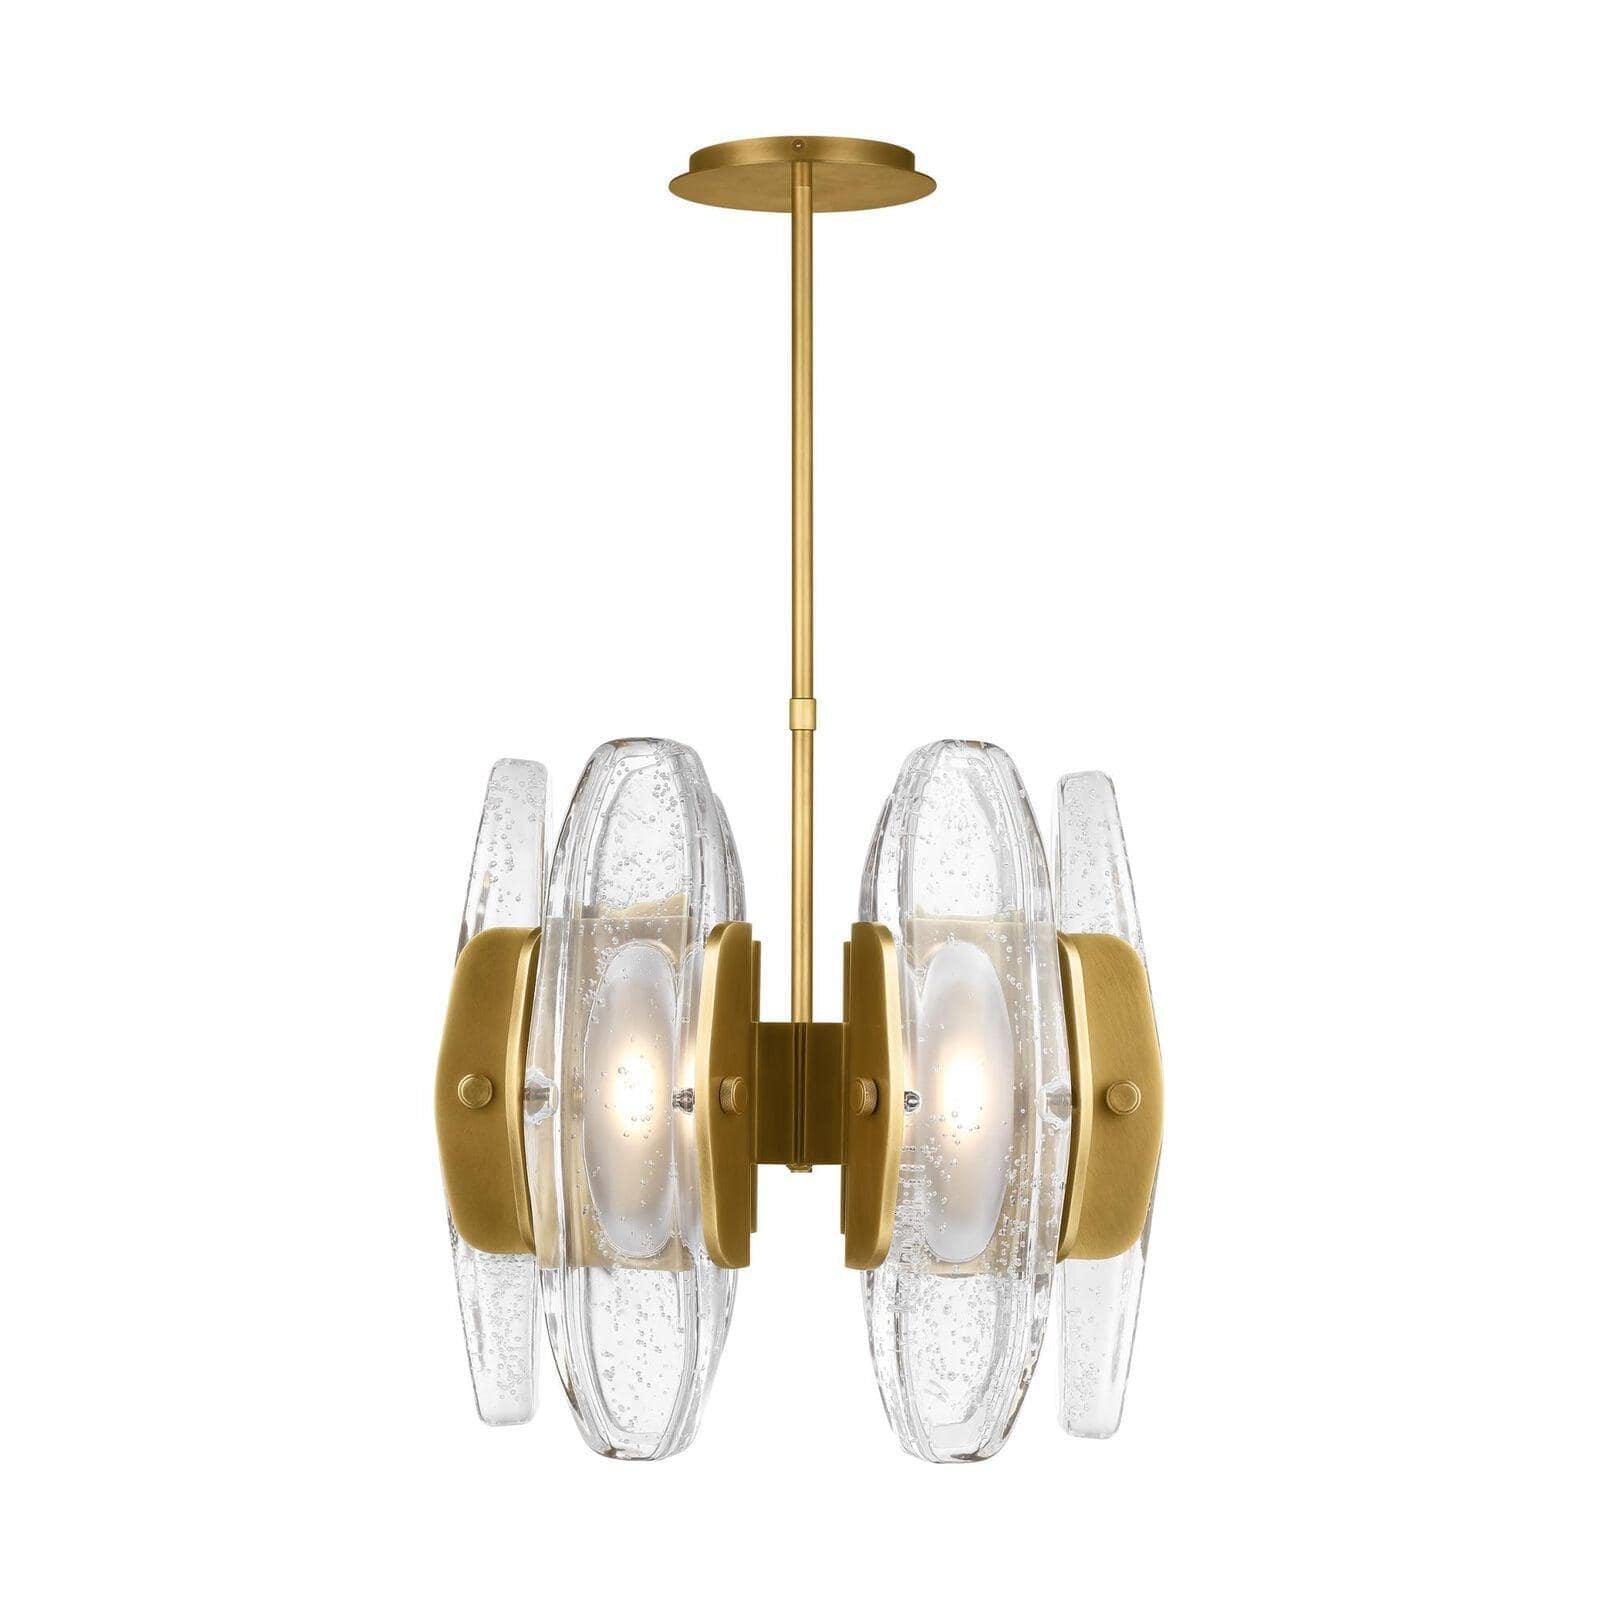 Visual Comfort Studio Collection LXW1031BBS at Showroom Lighting  Contemporary,Modern